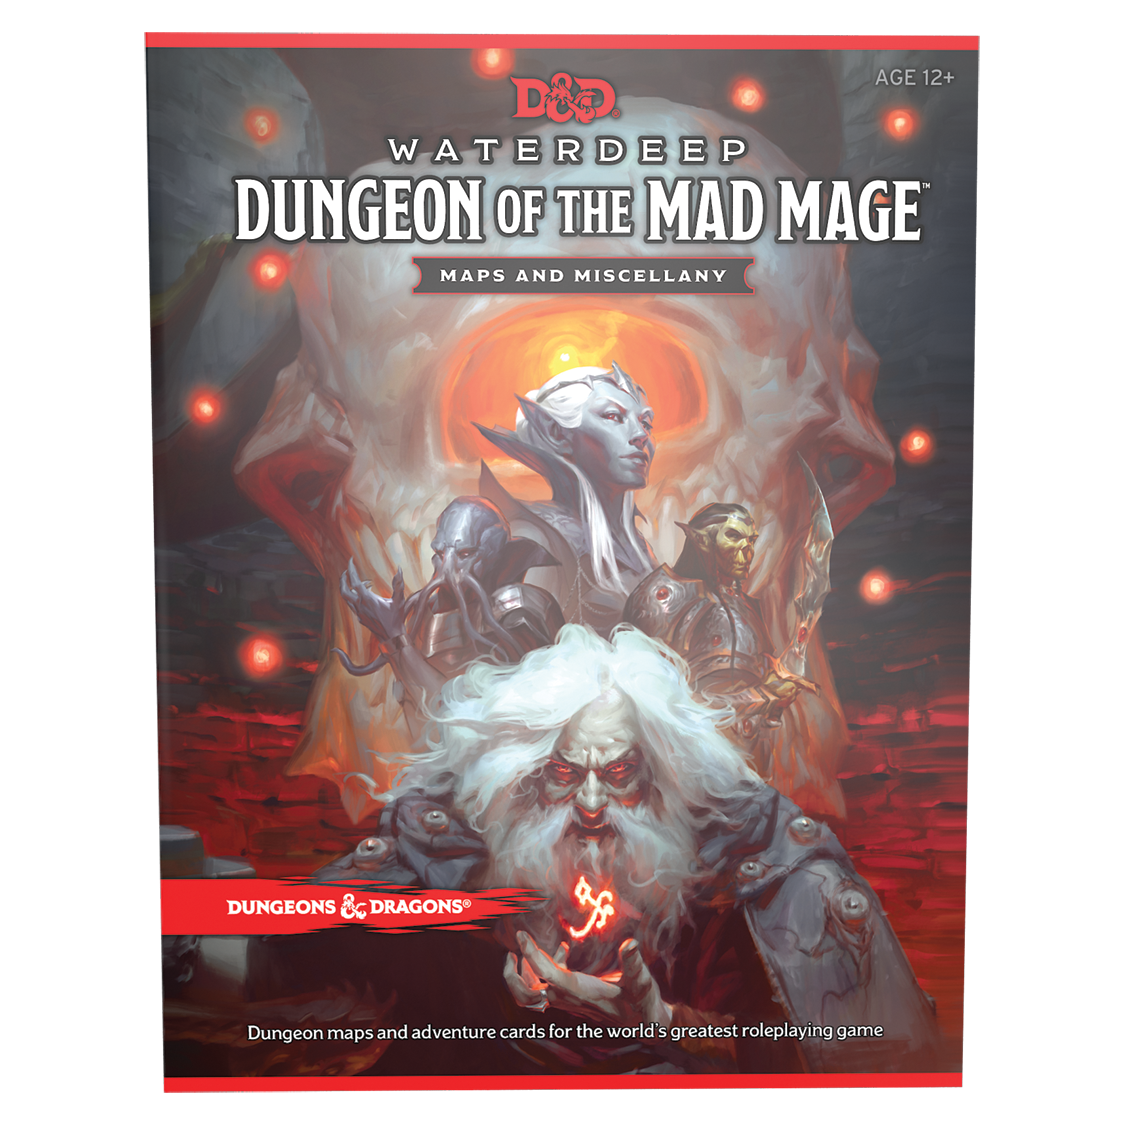 D&D Waterdeep Dungeon of the Mad Mage - Maps & Miscellany